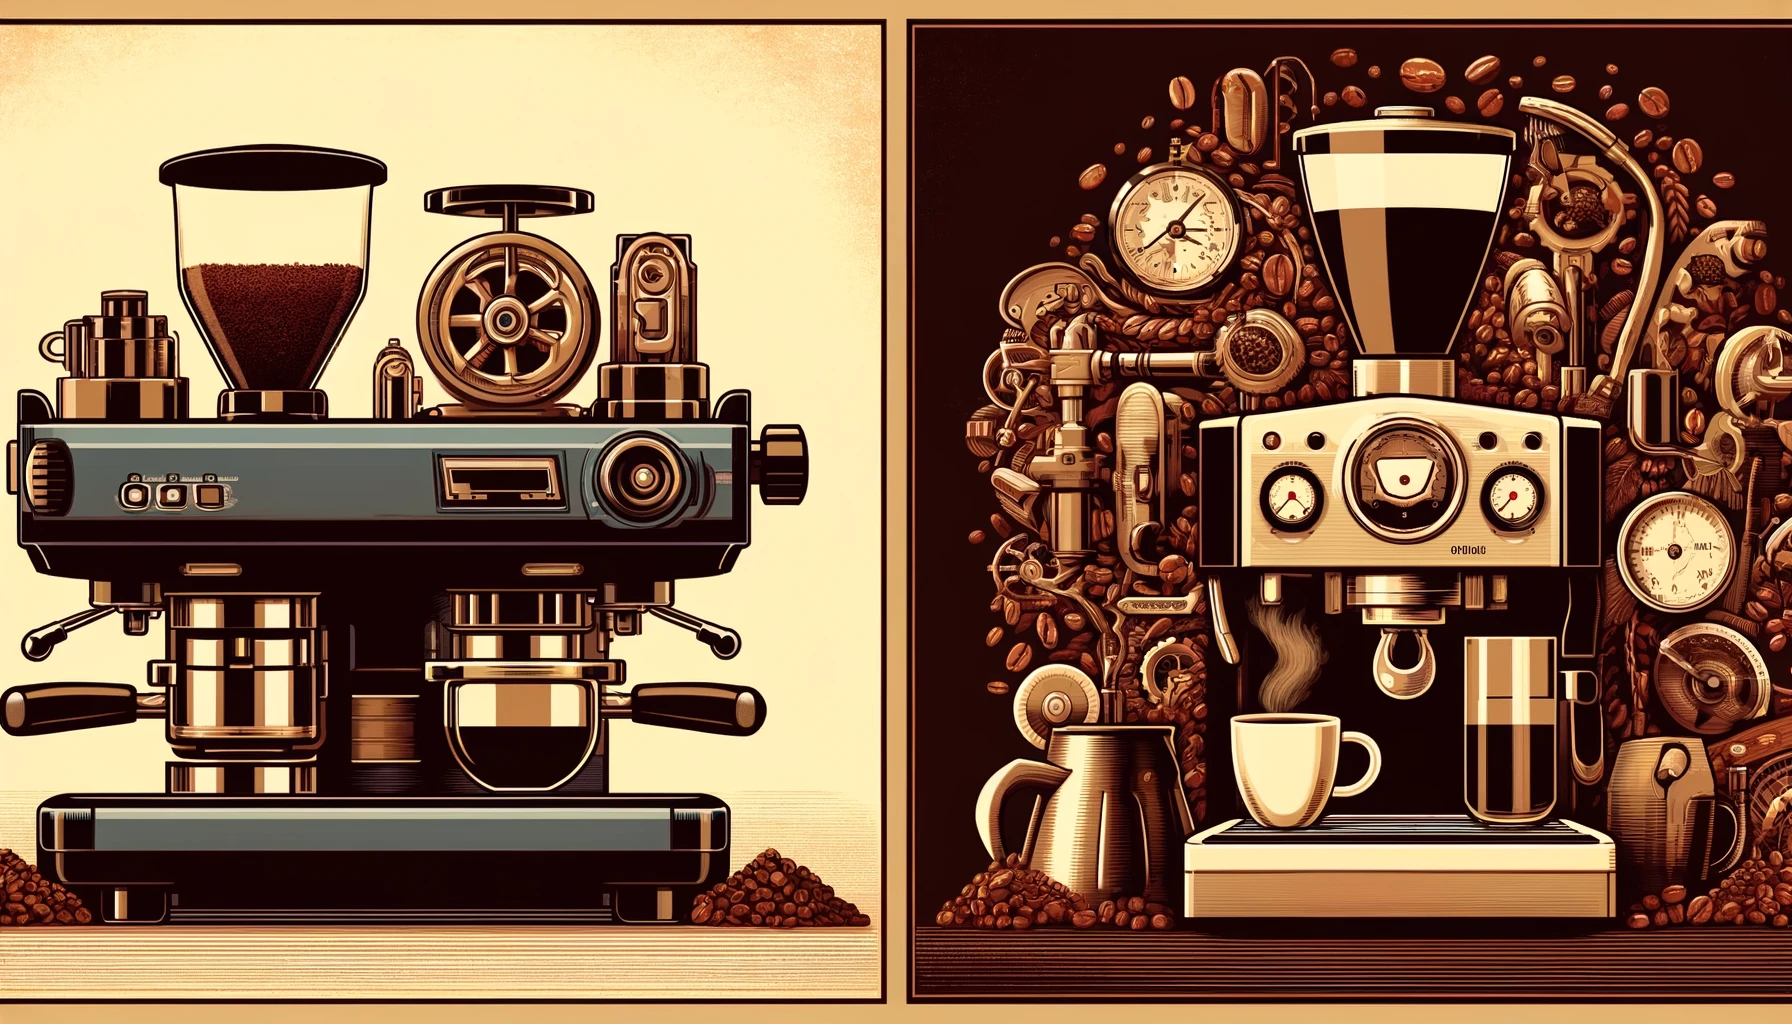 How do espresso machines with built-in grinders differ from traditional espresso machines